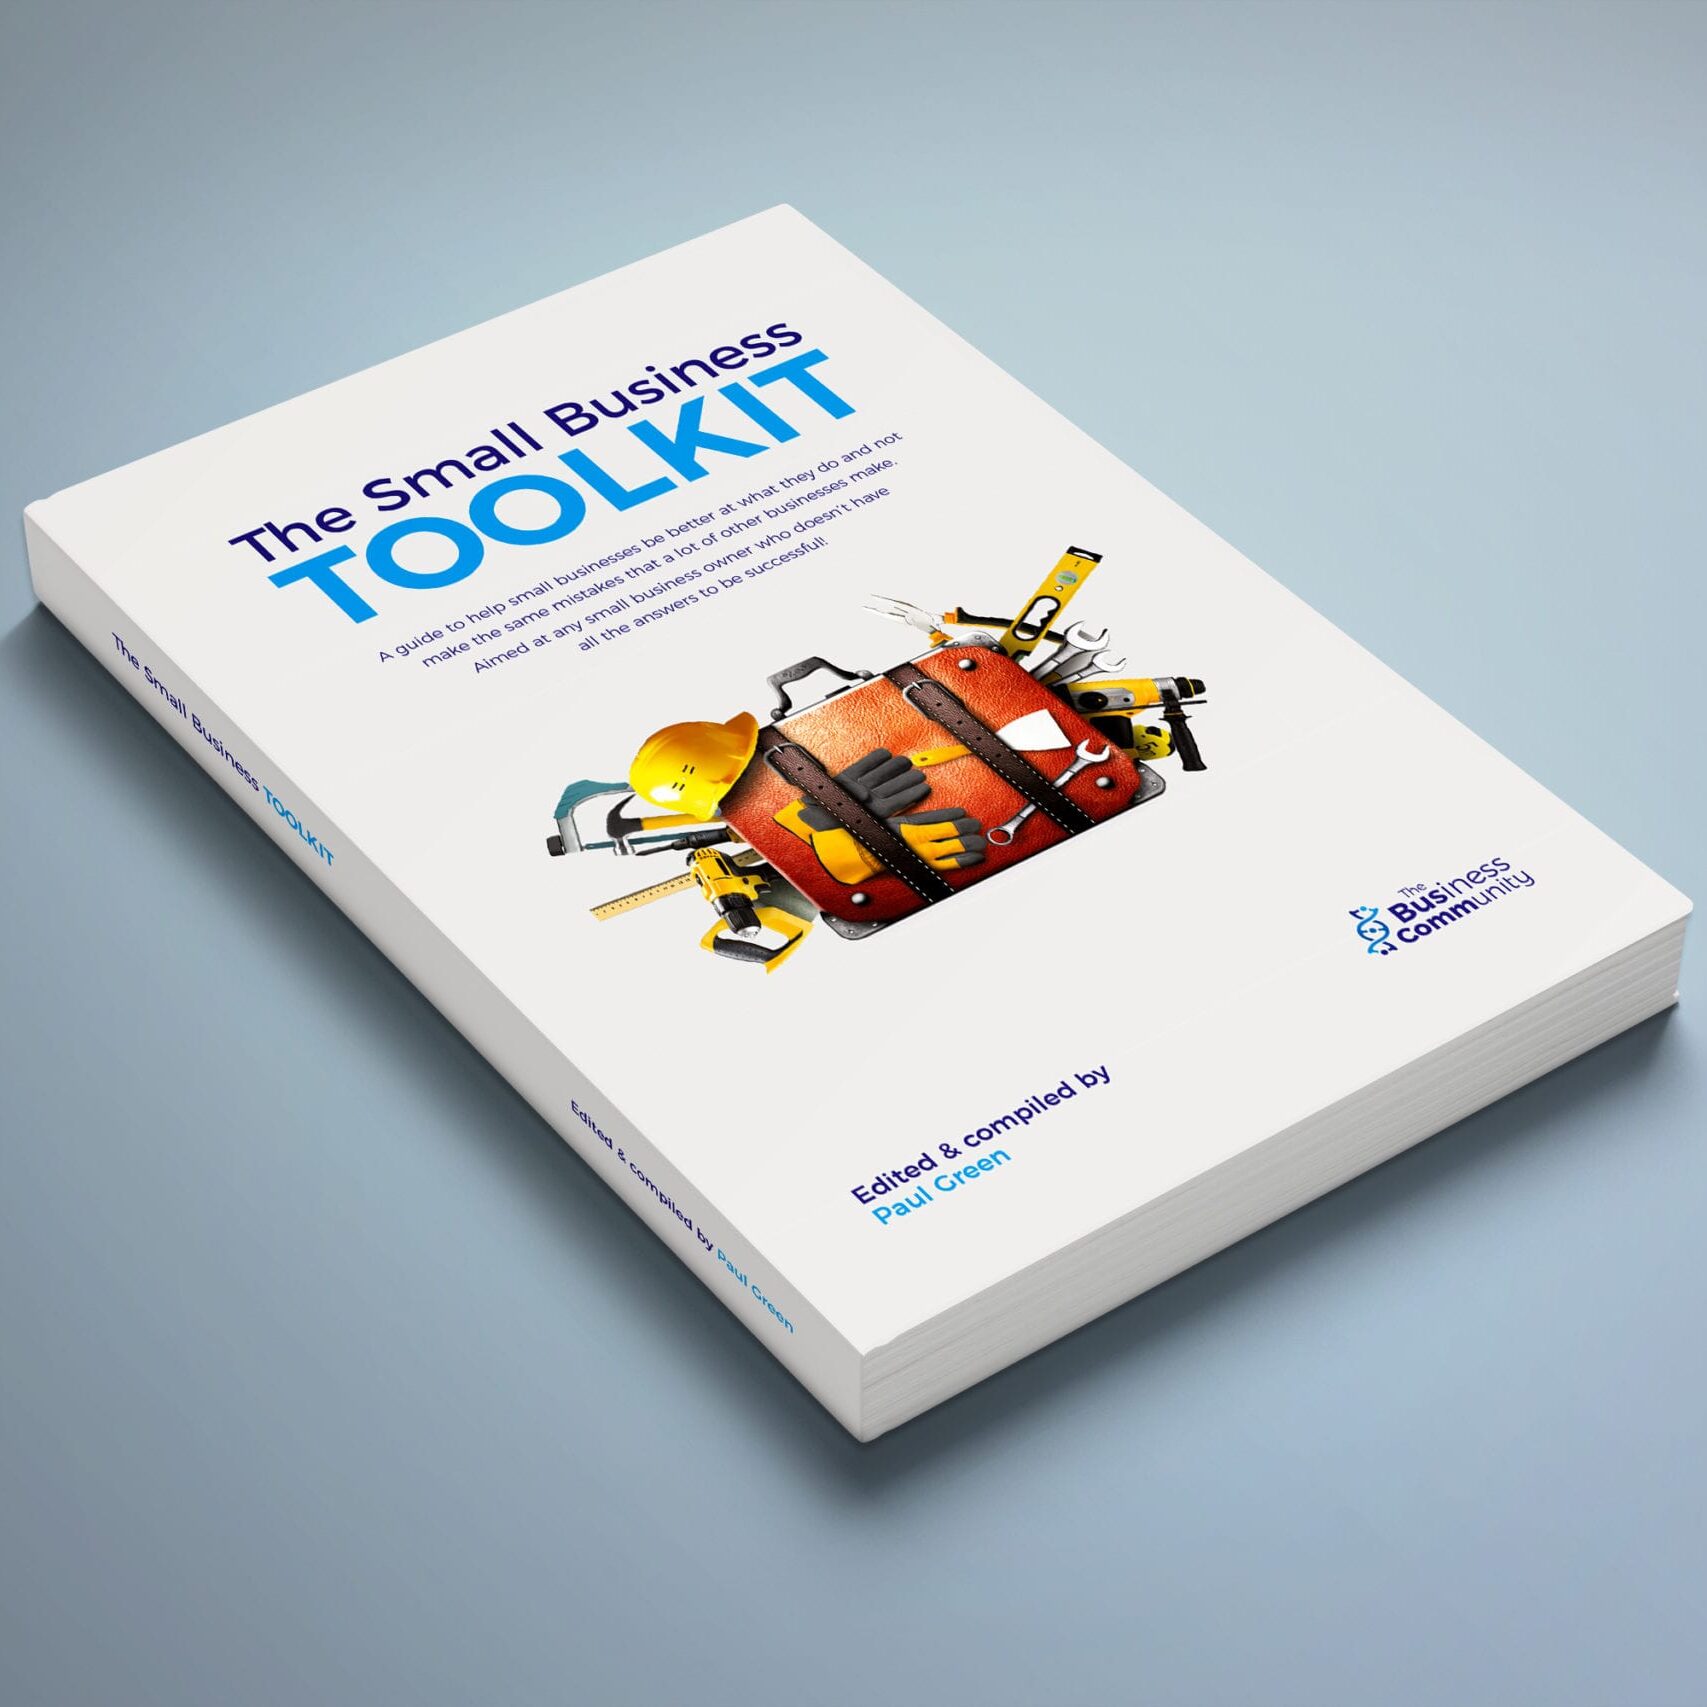 Book cover design for the Small Business Toolkit